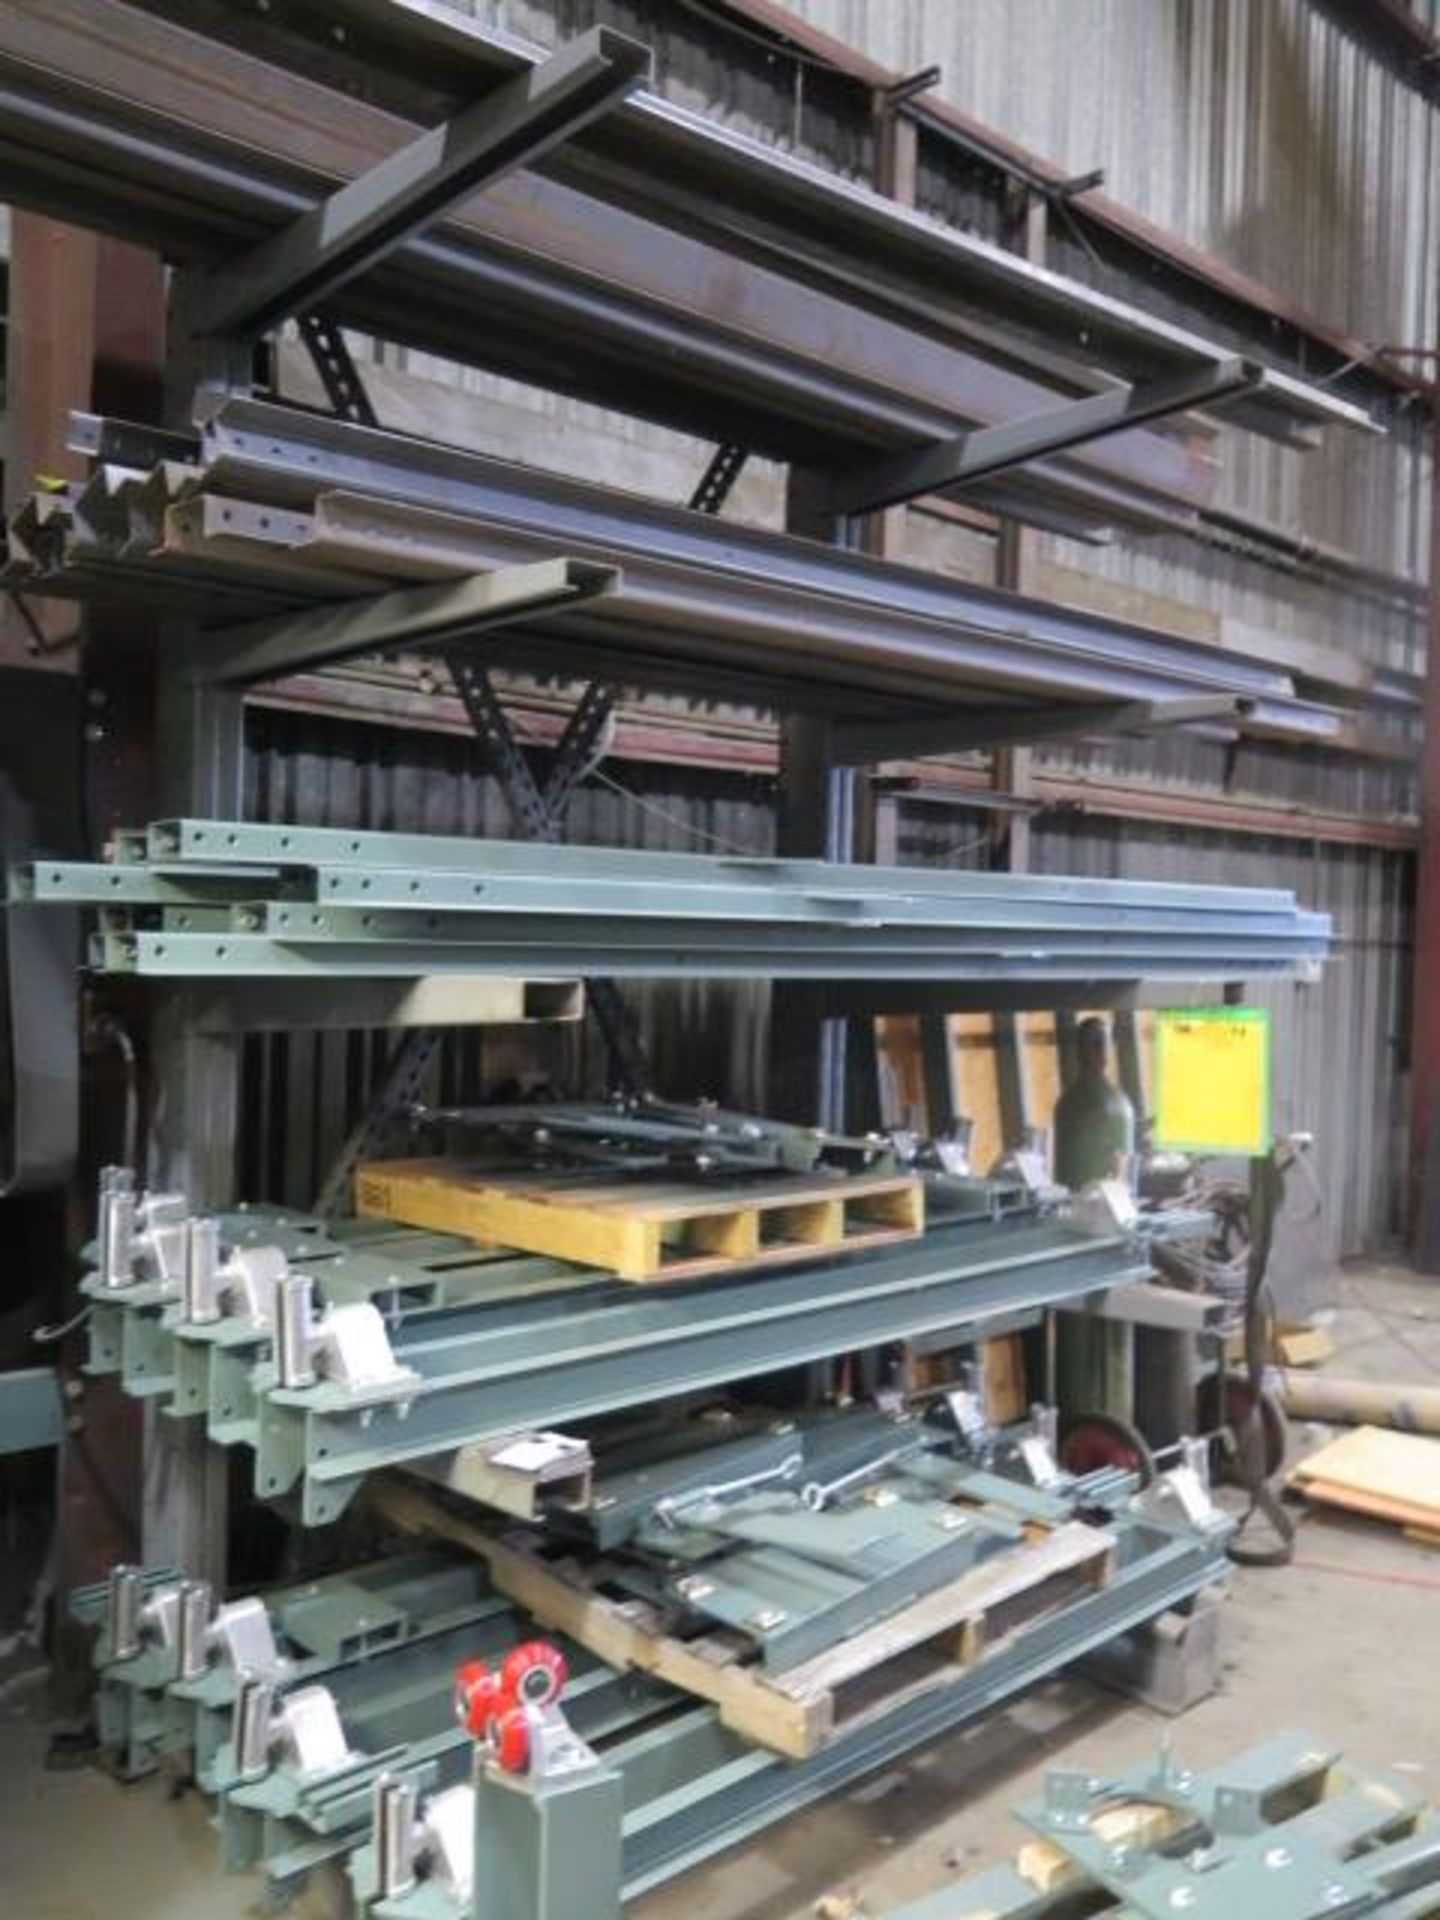 Cantilever Material Rack (SOLD AS-IS - NO WARRANTY)